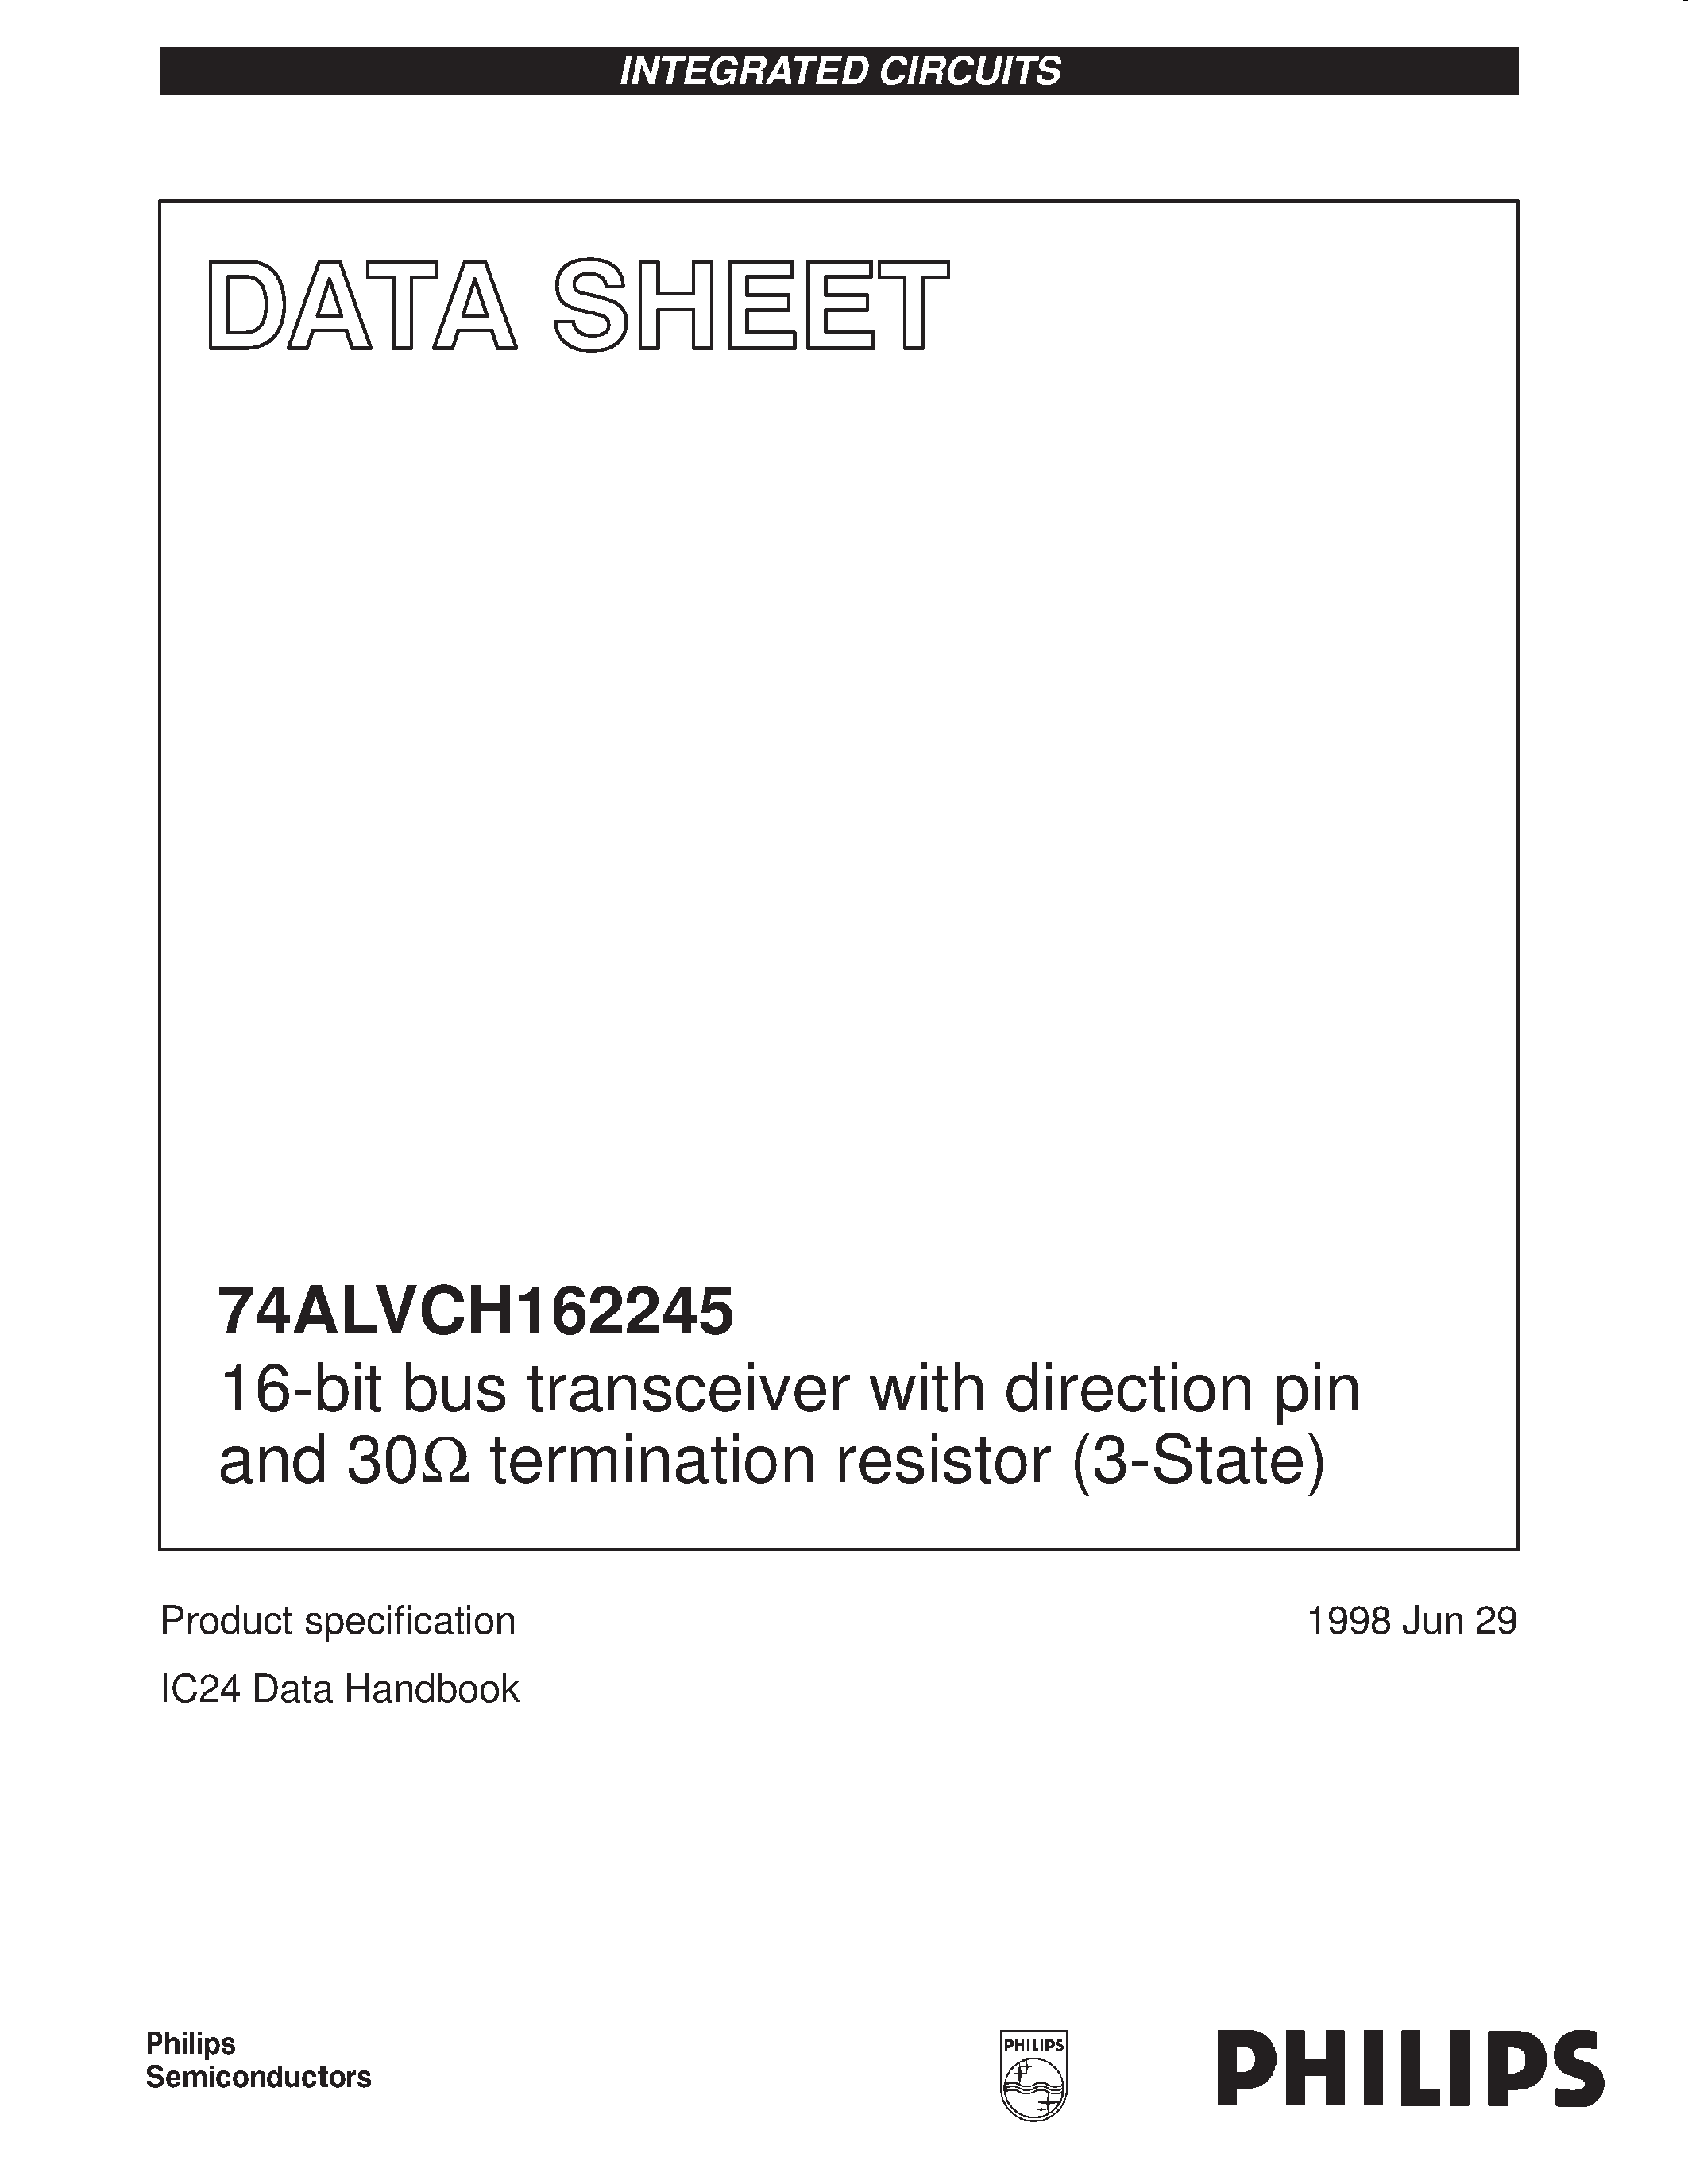 Datasheet 74ALVCH162245 - 16-bit bus transceiver with direction pin and 30ohm termination resistor 3-State page 1